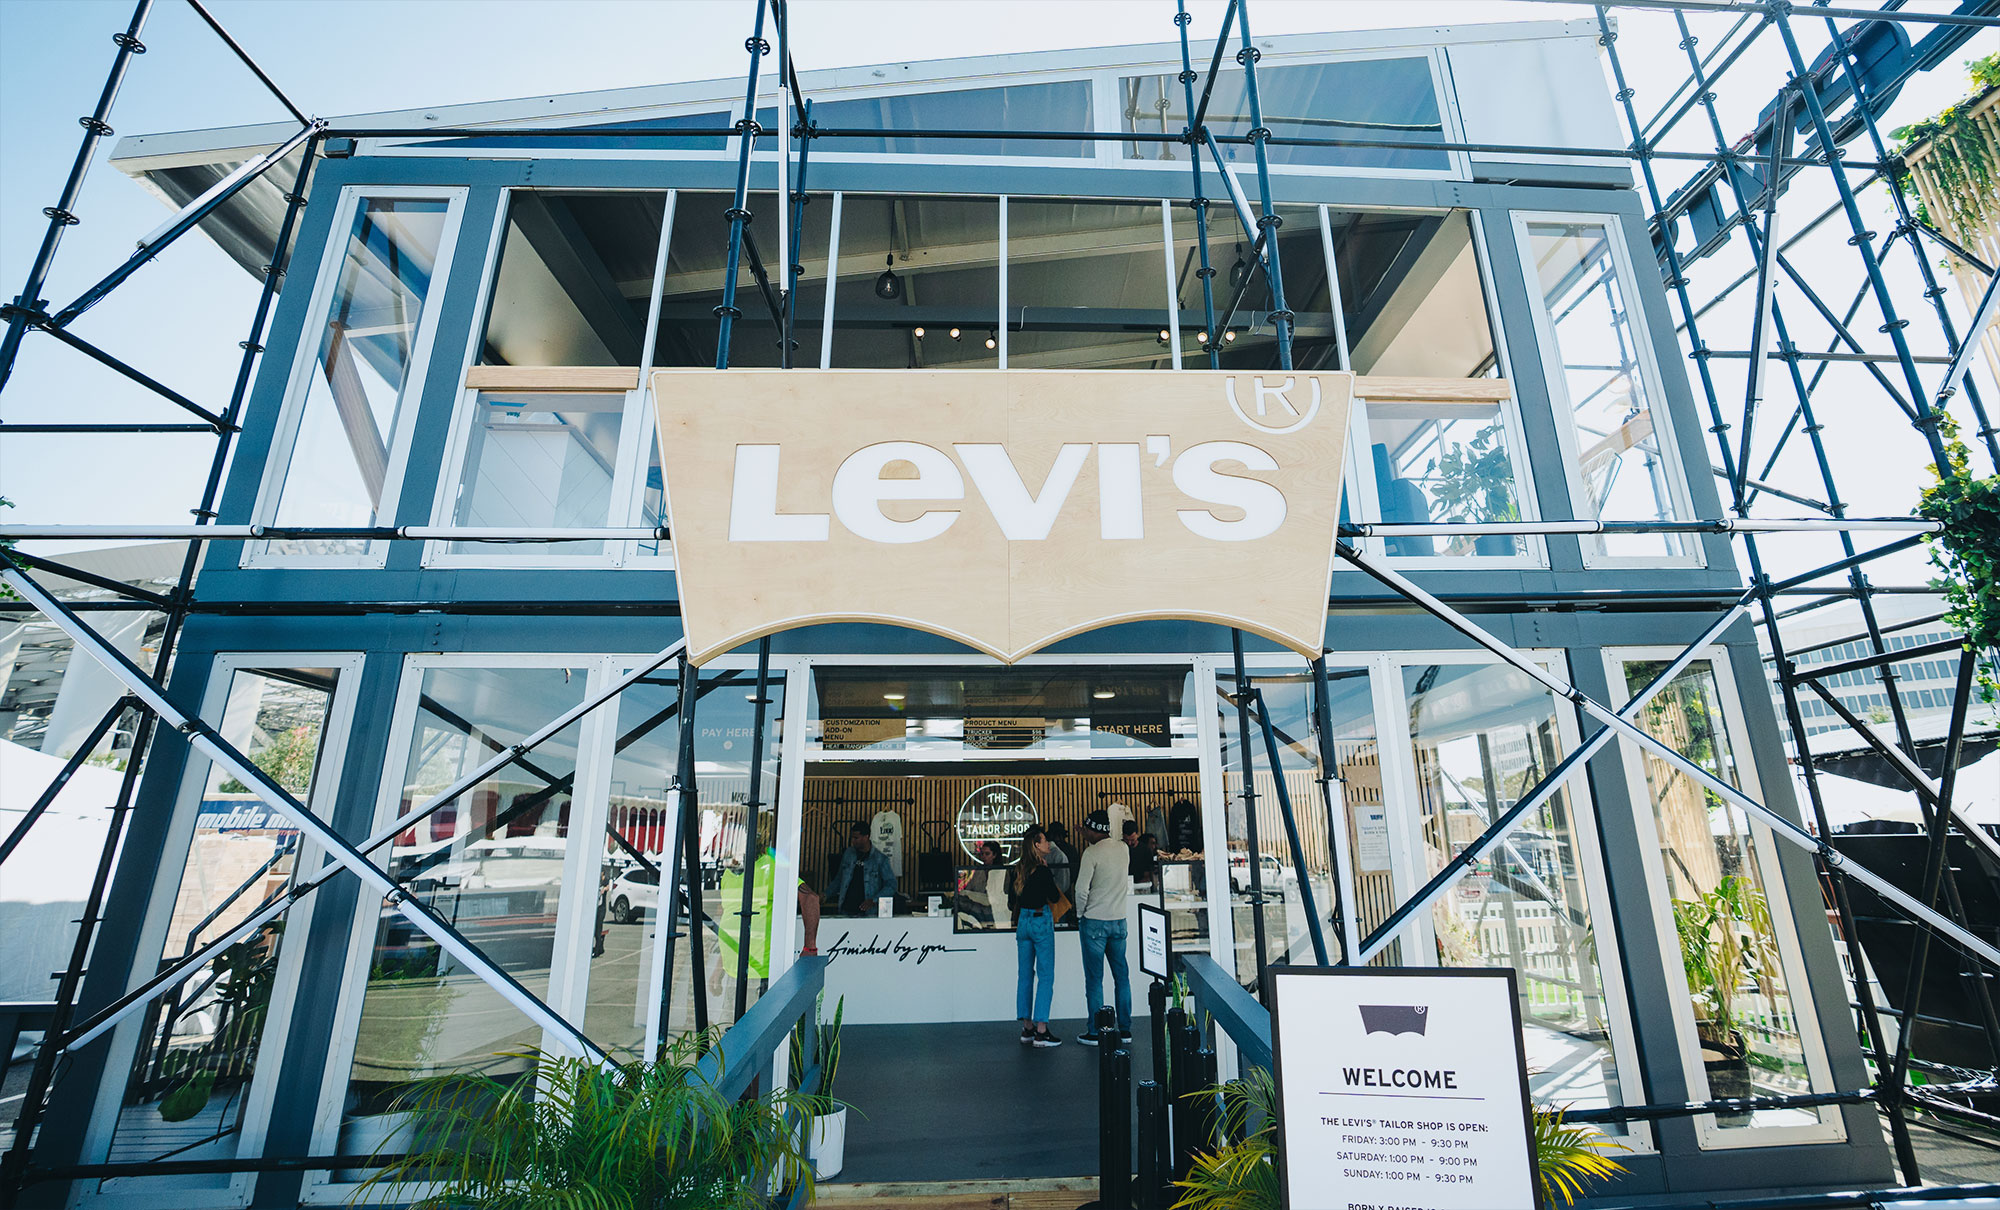 Levi's® Takes Over Rolling Loud - Levi Strauss & Co : Levi Strauss & Co